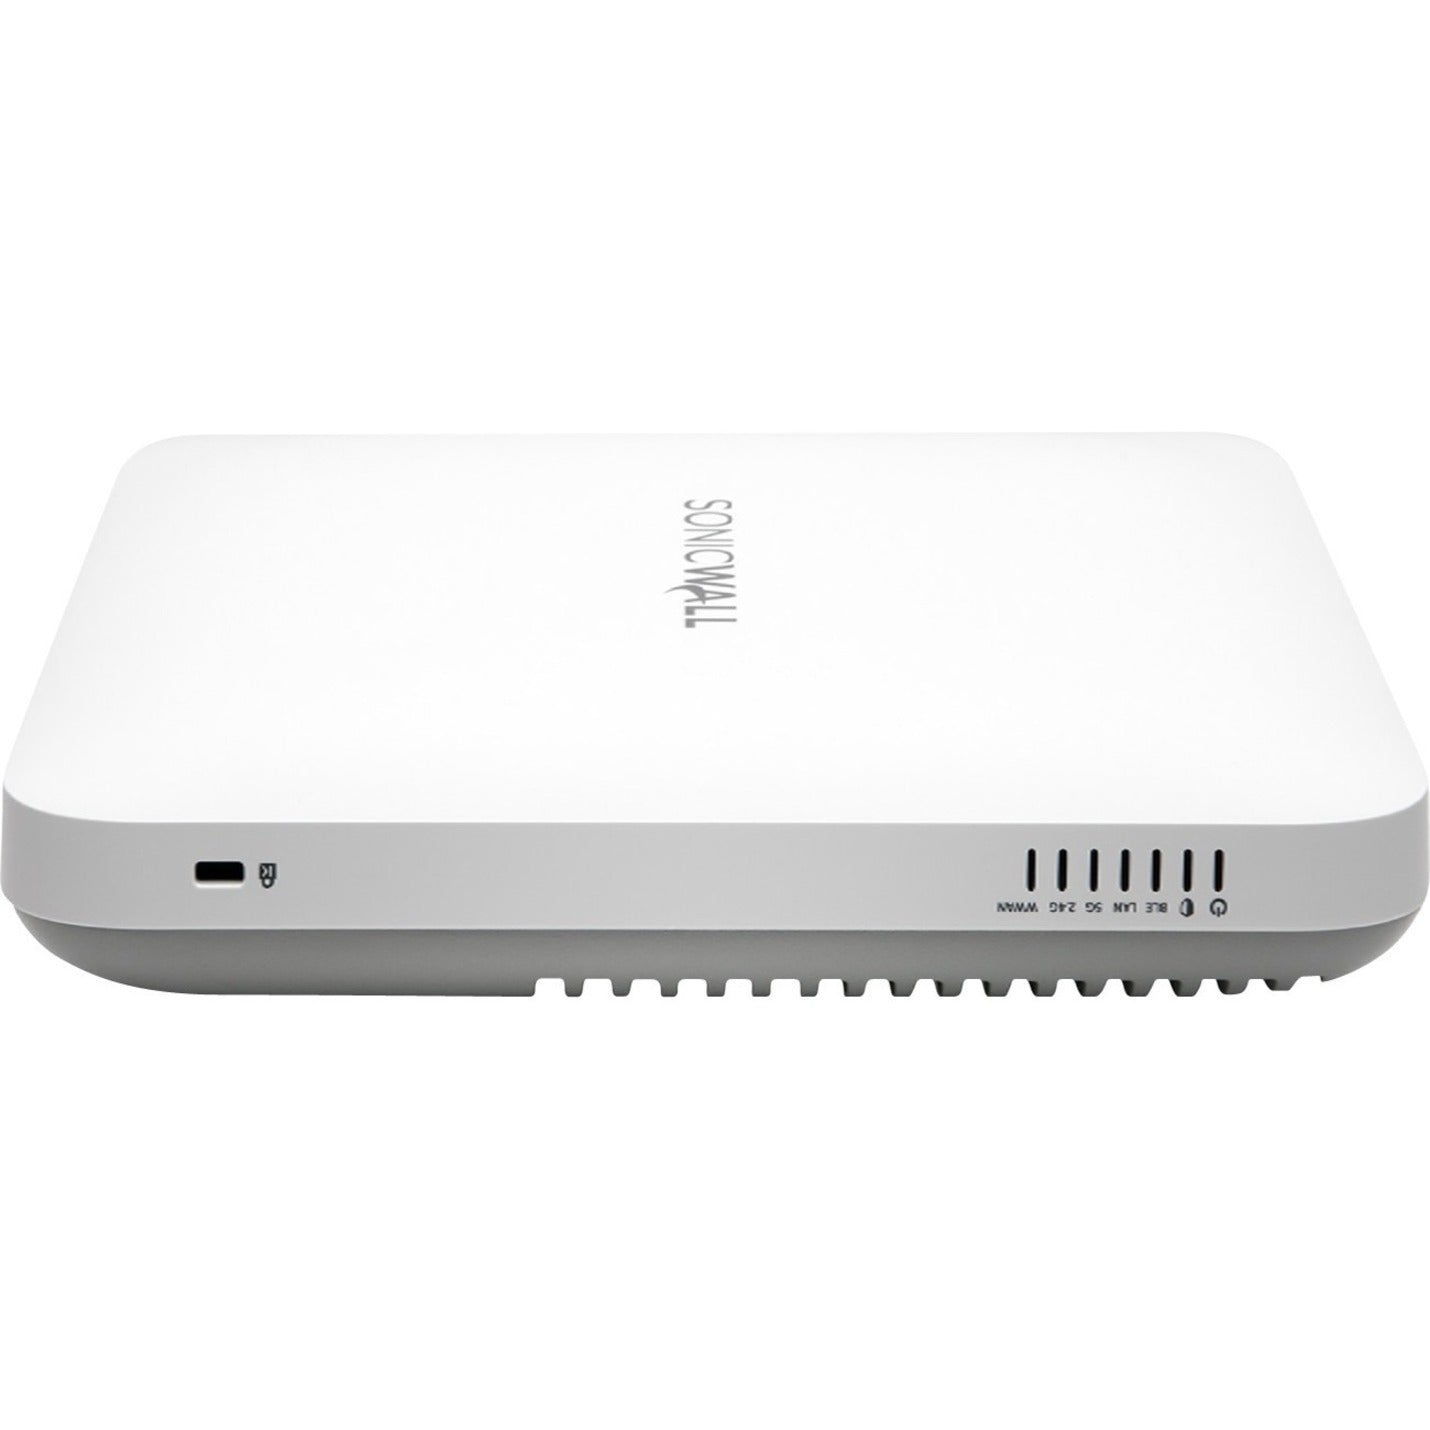 SonicWall 03-SSC-0329 SonicWave 681 Wireless Access Point, Secure Upgrade Plus with Secure Cloud WiFi Management and Support 3YR